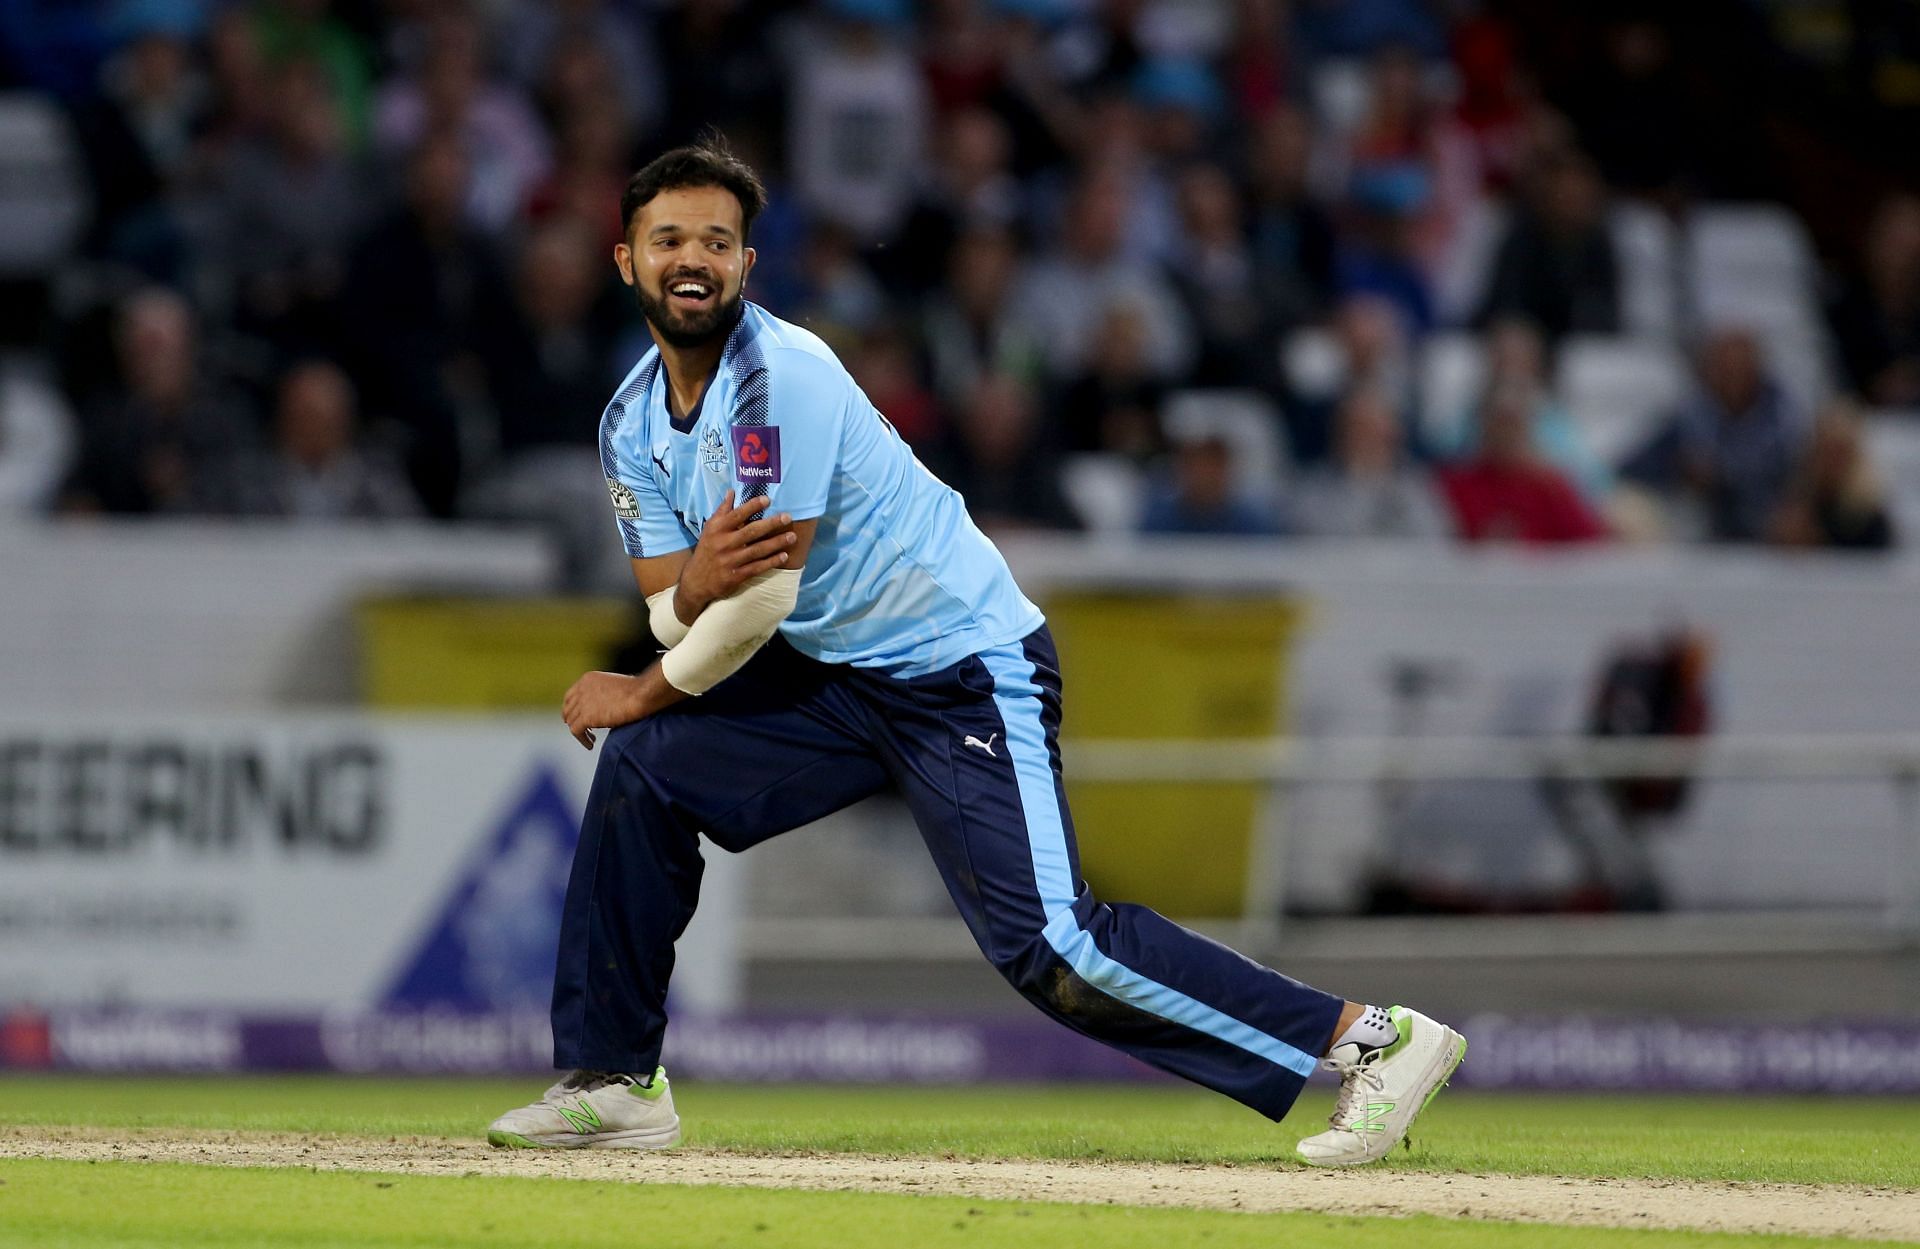 Azeem Rafiq in a game for Yorkshire. (Image Credits: Getty)